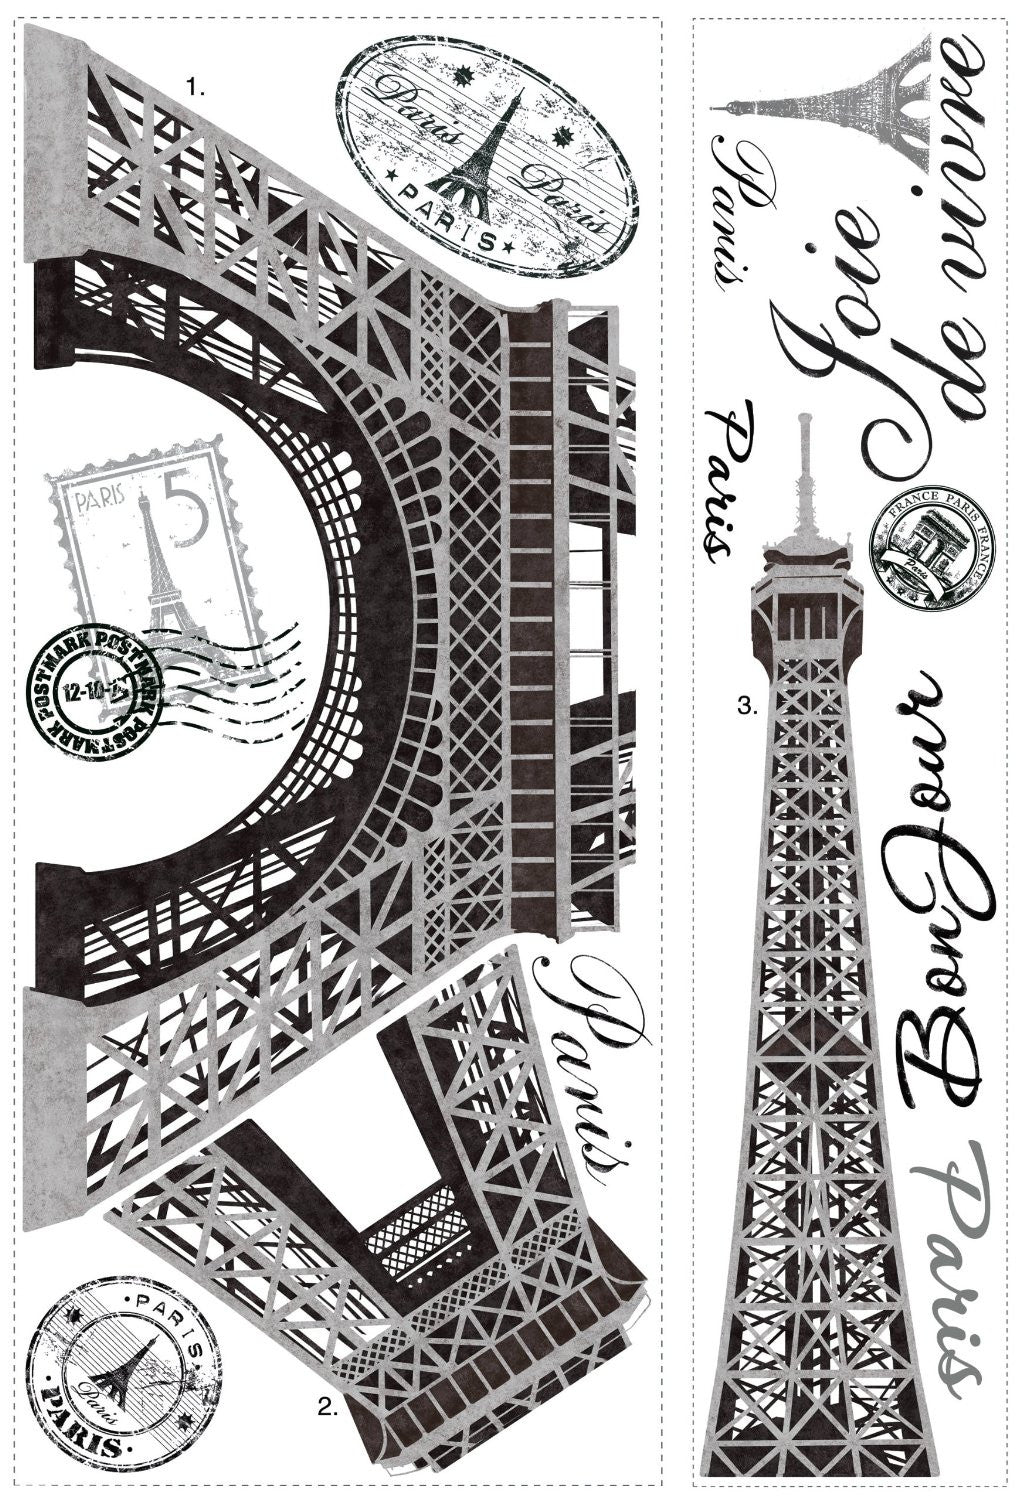 Eiffel Tower Giant Wall Decal - OddGifts.com